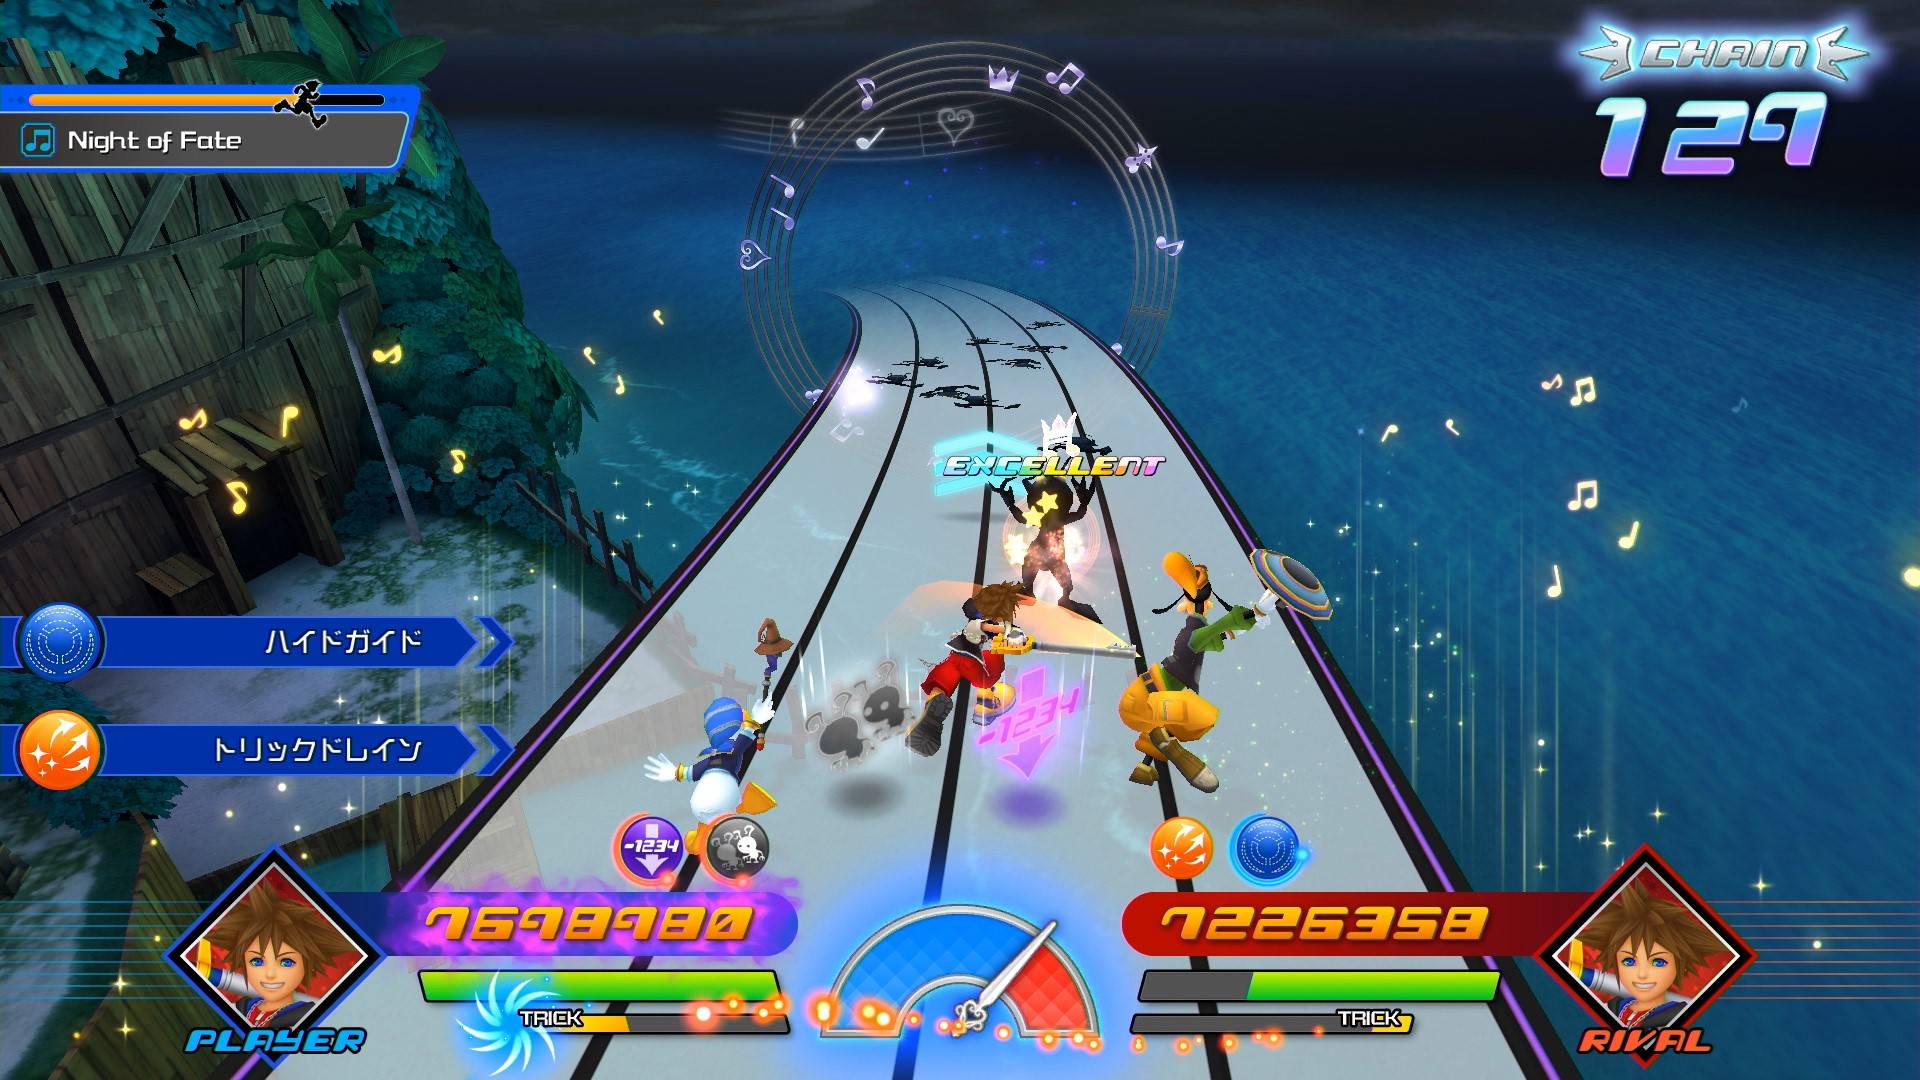 Best music games: several characters from Kingdom Hearts jump over music notes